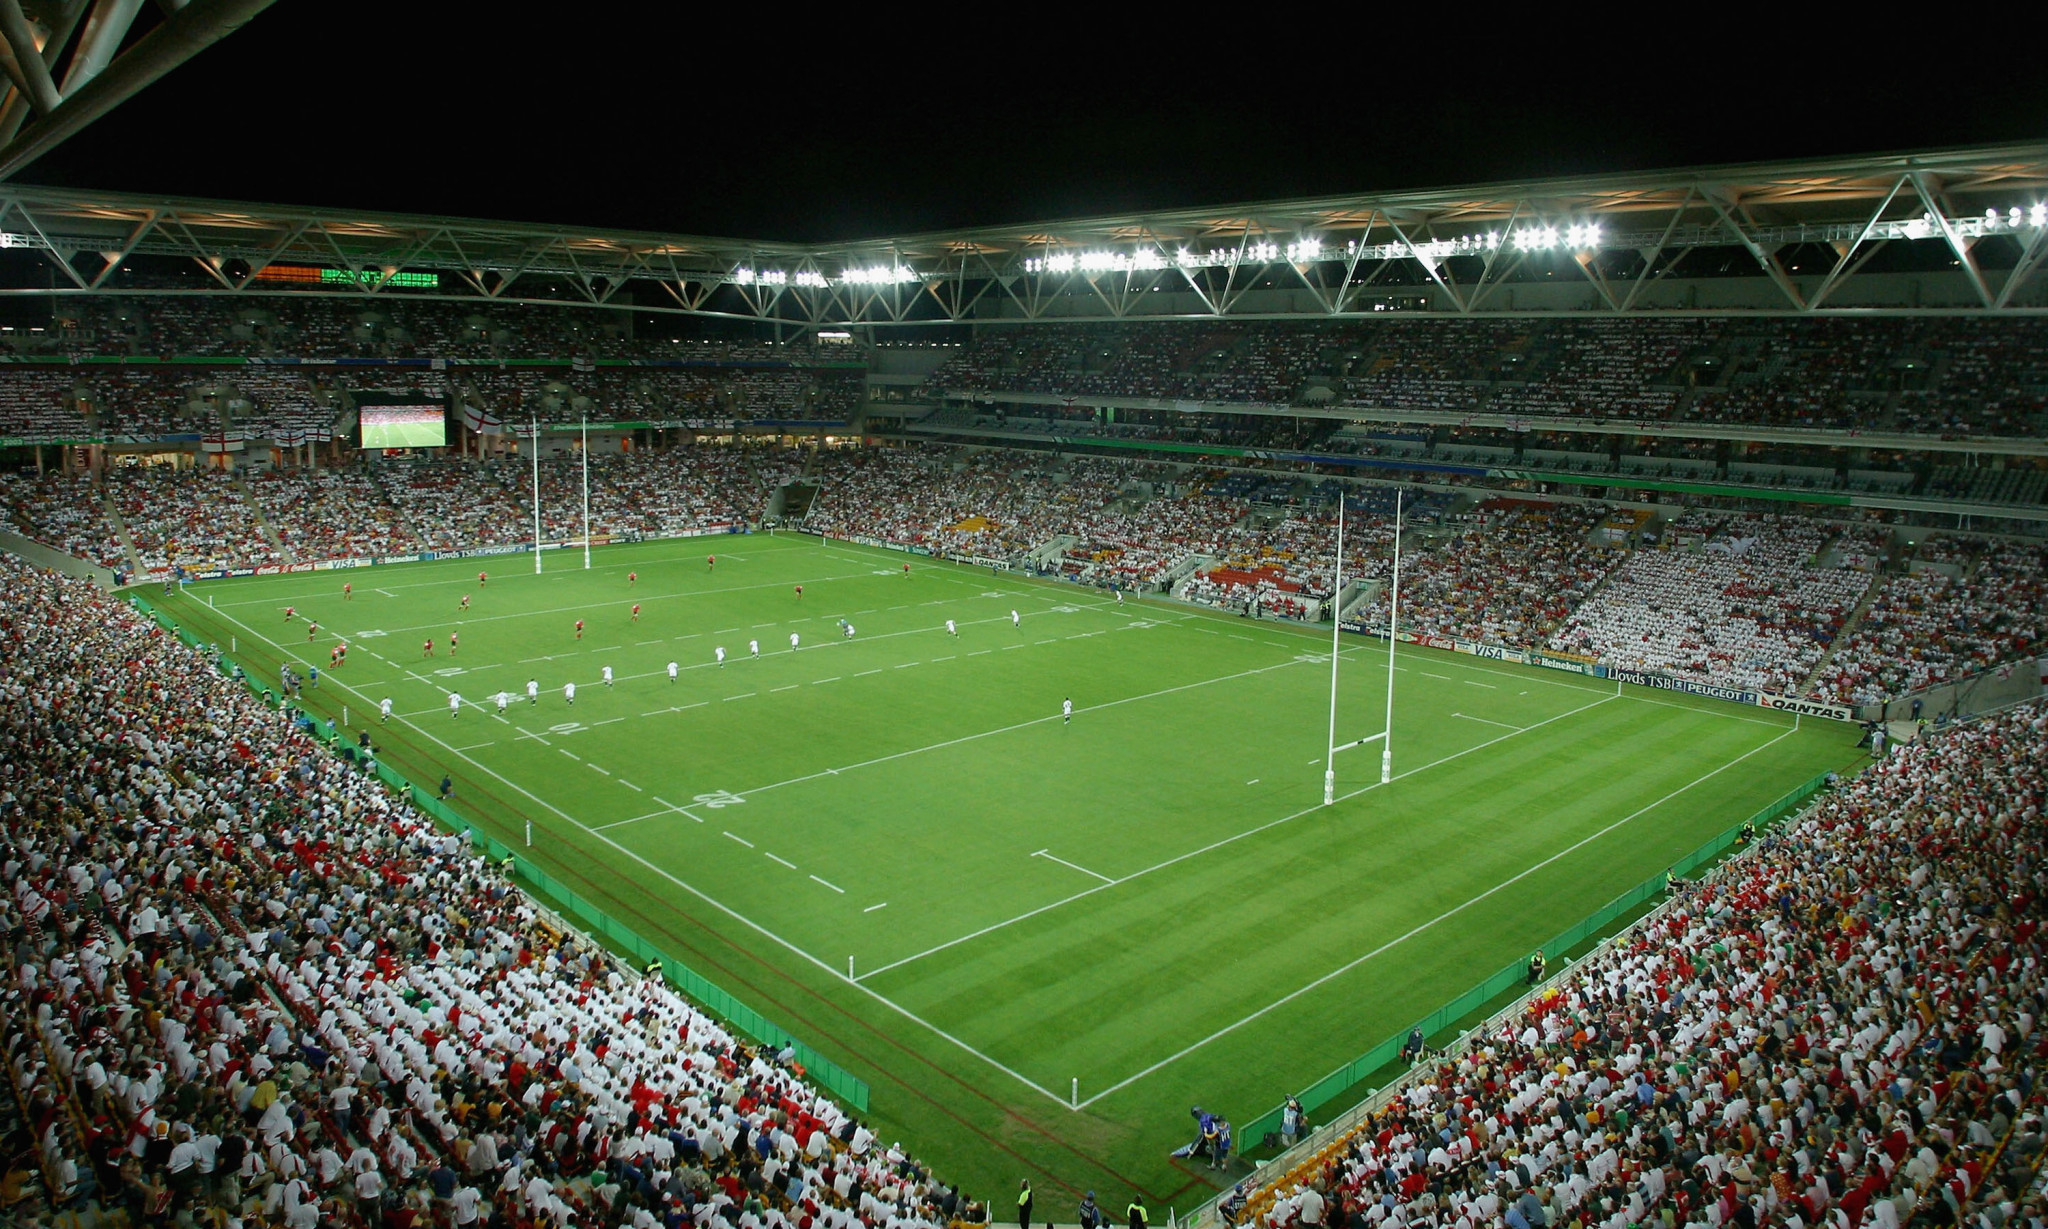 Brisbane was among the host cities when Australia staged the 2003 Rugby World Cup  ©Getty Images